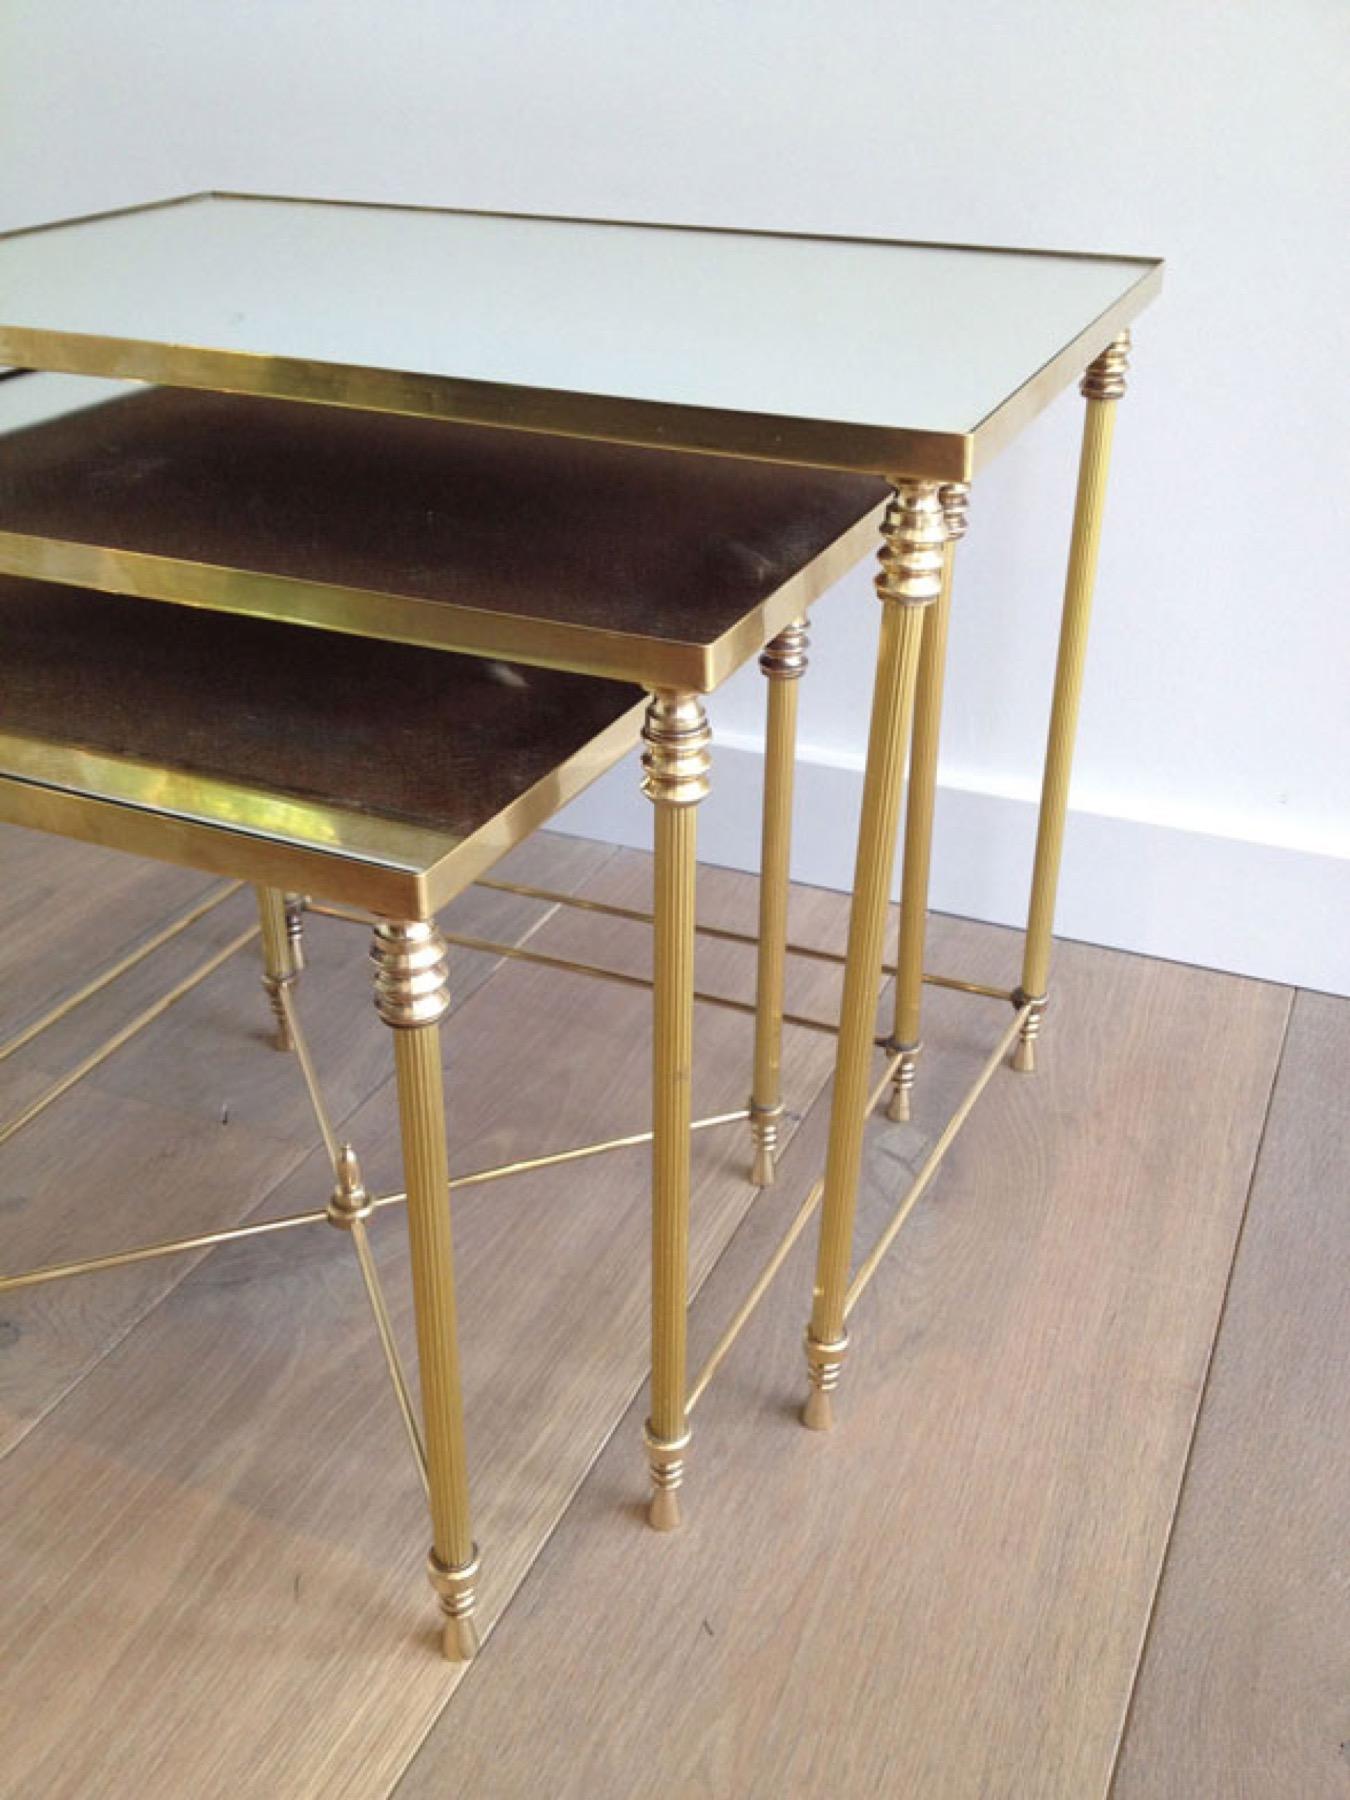 Set of 3 Neoclassical Style Brass Nesting Tables with Mirror Tops, French Work In Good Condition For Sale In Marcq-en-Barœul, Hauts-de-France